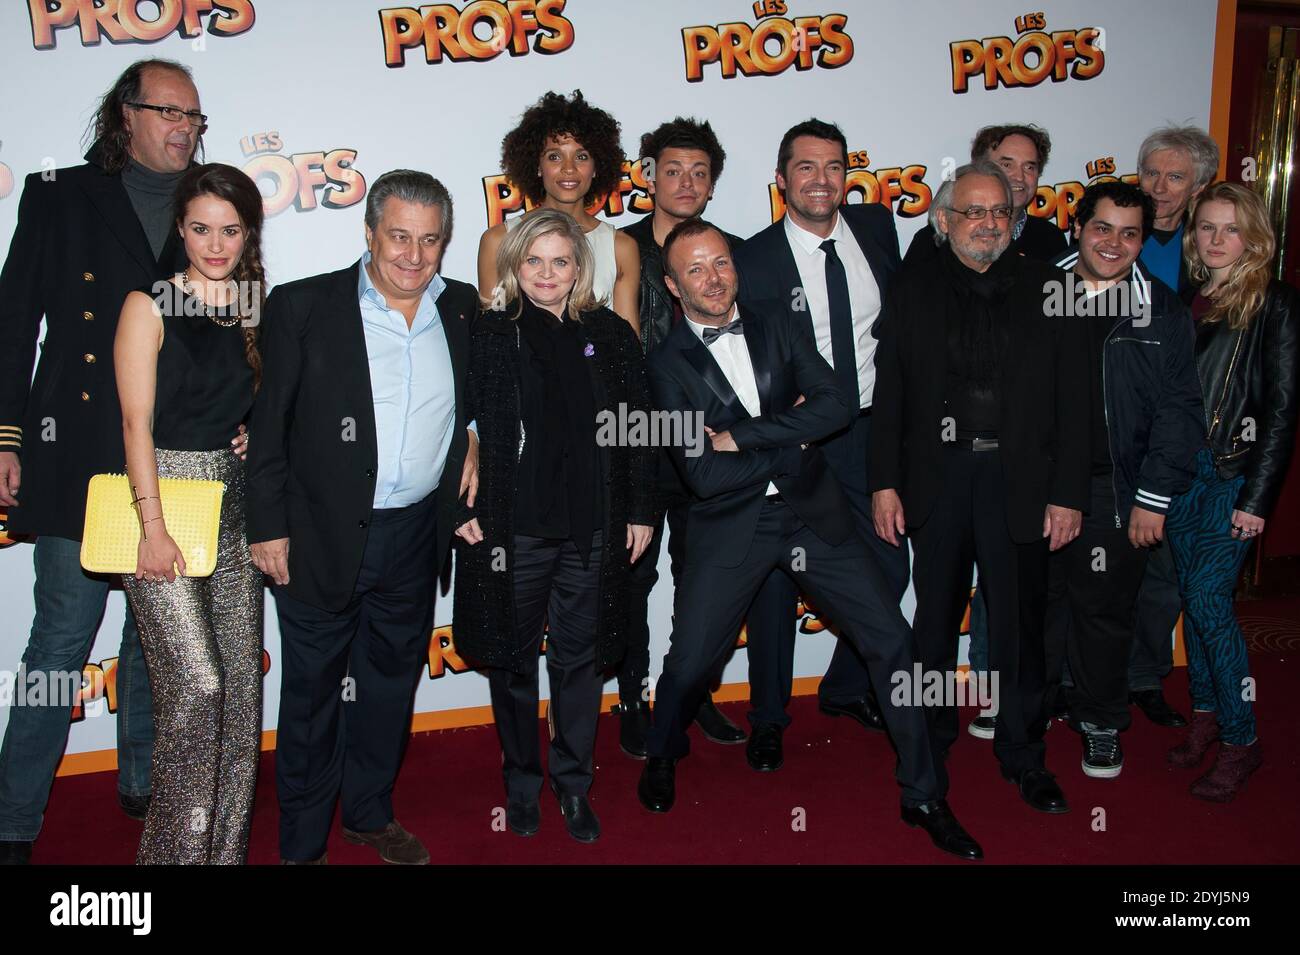 Cast of the movie including Director Pierre-Francois Martin-Laval, Christian Clavier, Isabelle Nanty, Kev Adams, Stefi Celma, Alice David, Arnaud Ducret, Francois Morel and Raymond Bouchard attending the premiere of 'Les Profs' held at the Grand Rex Cinema in Paris France, on April 09, 2013. Photo by Nicolas Genin/ABACAPRESS.COM Stock Photo